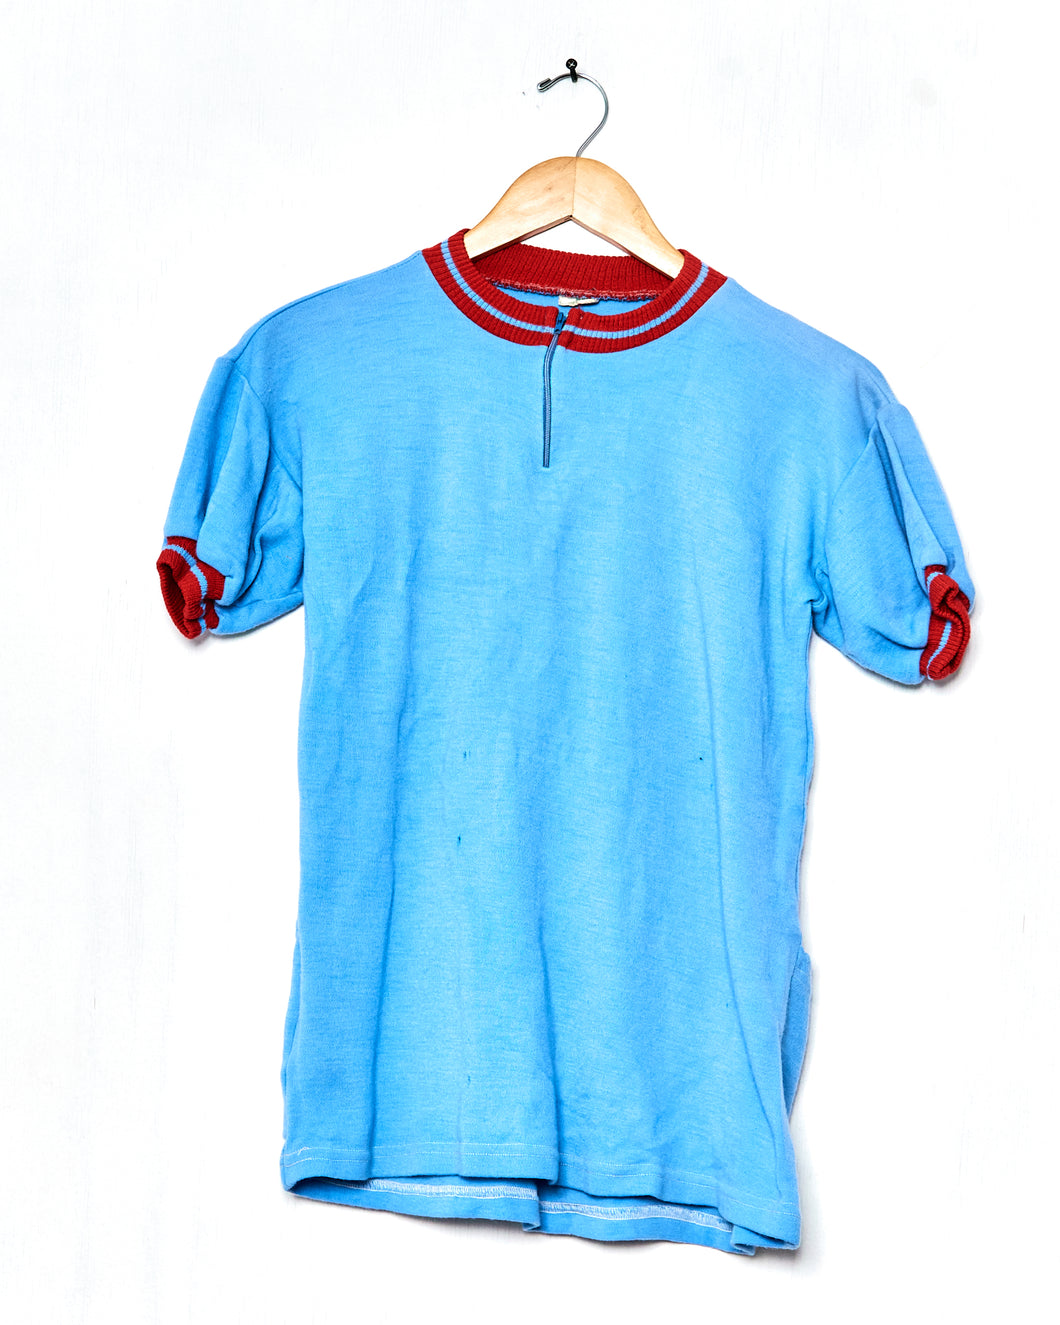 1970s Kendaroy Cycling Jersey